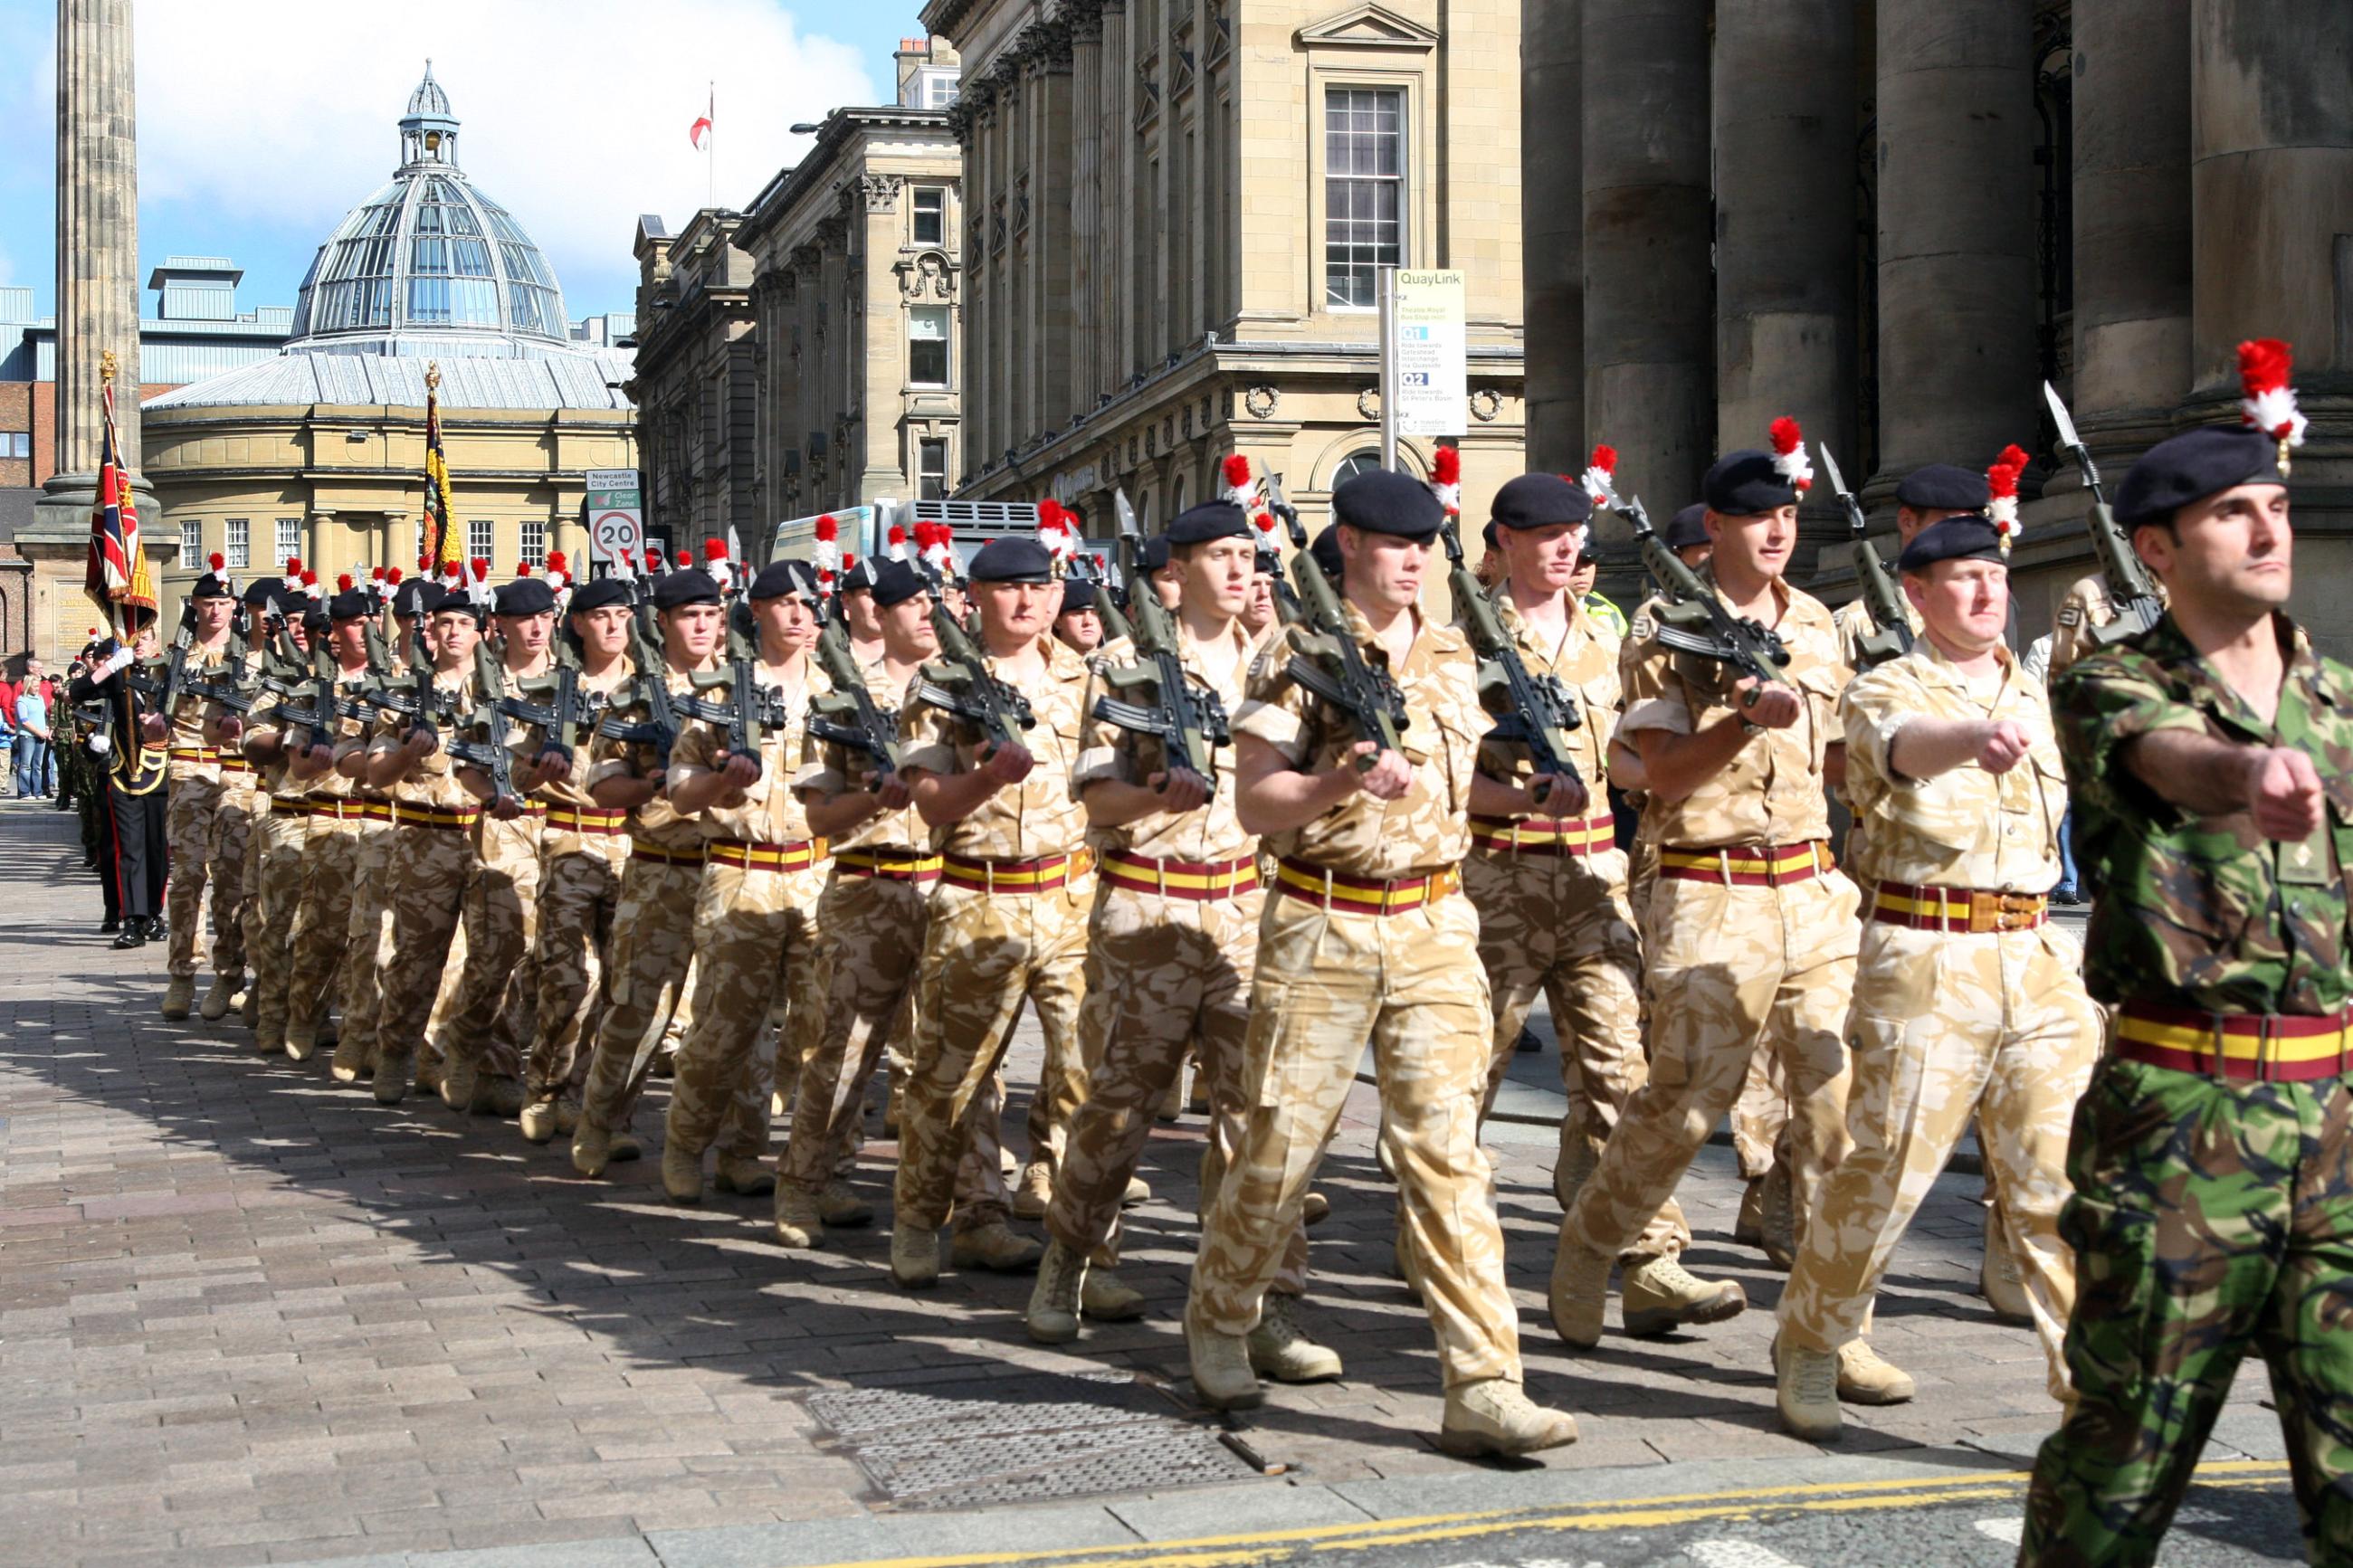 Royal Regiment of Fusiliers on Parade in Newcastle